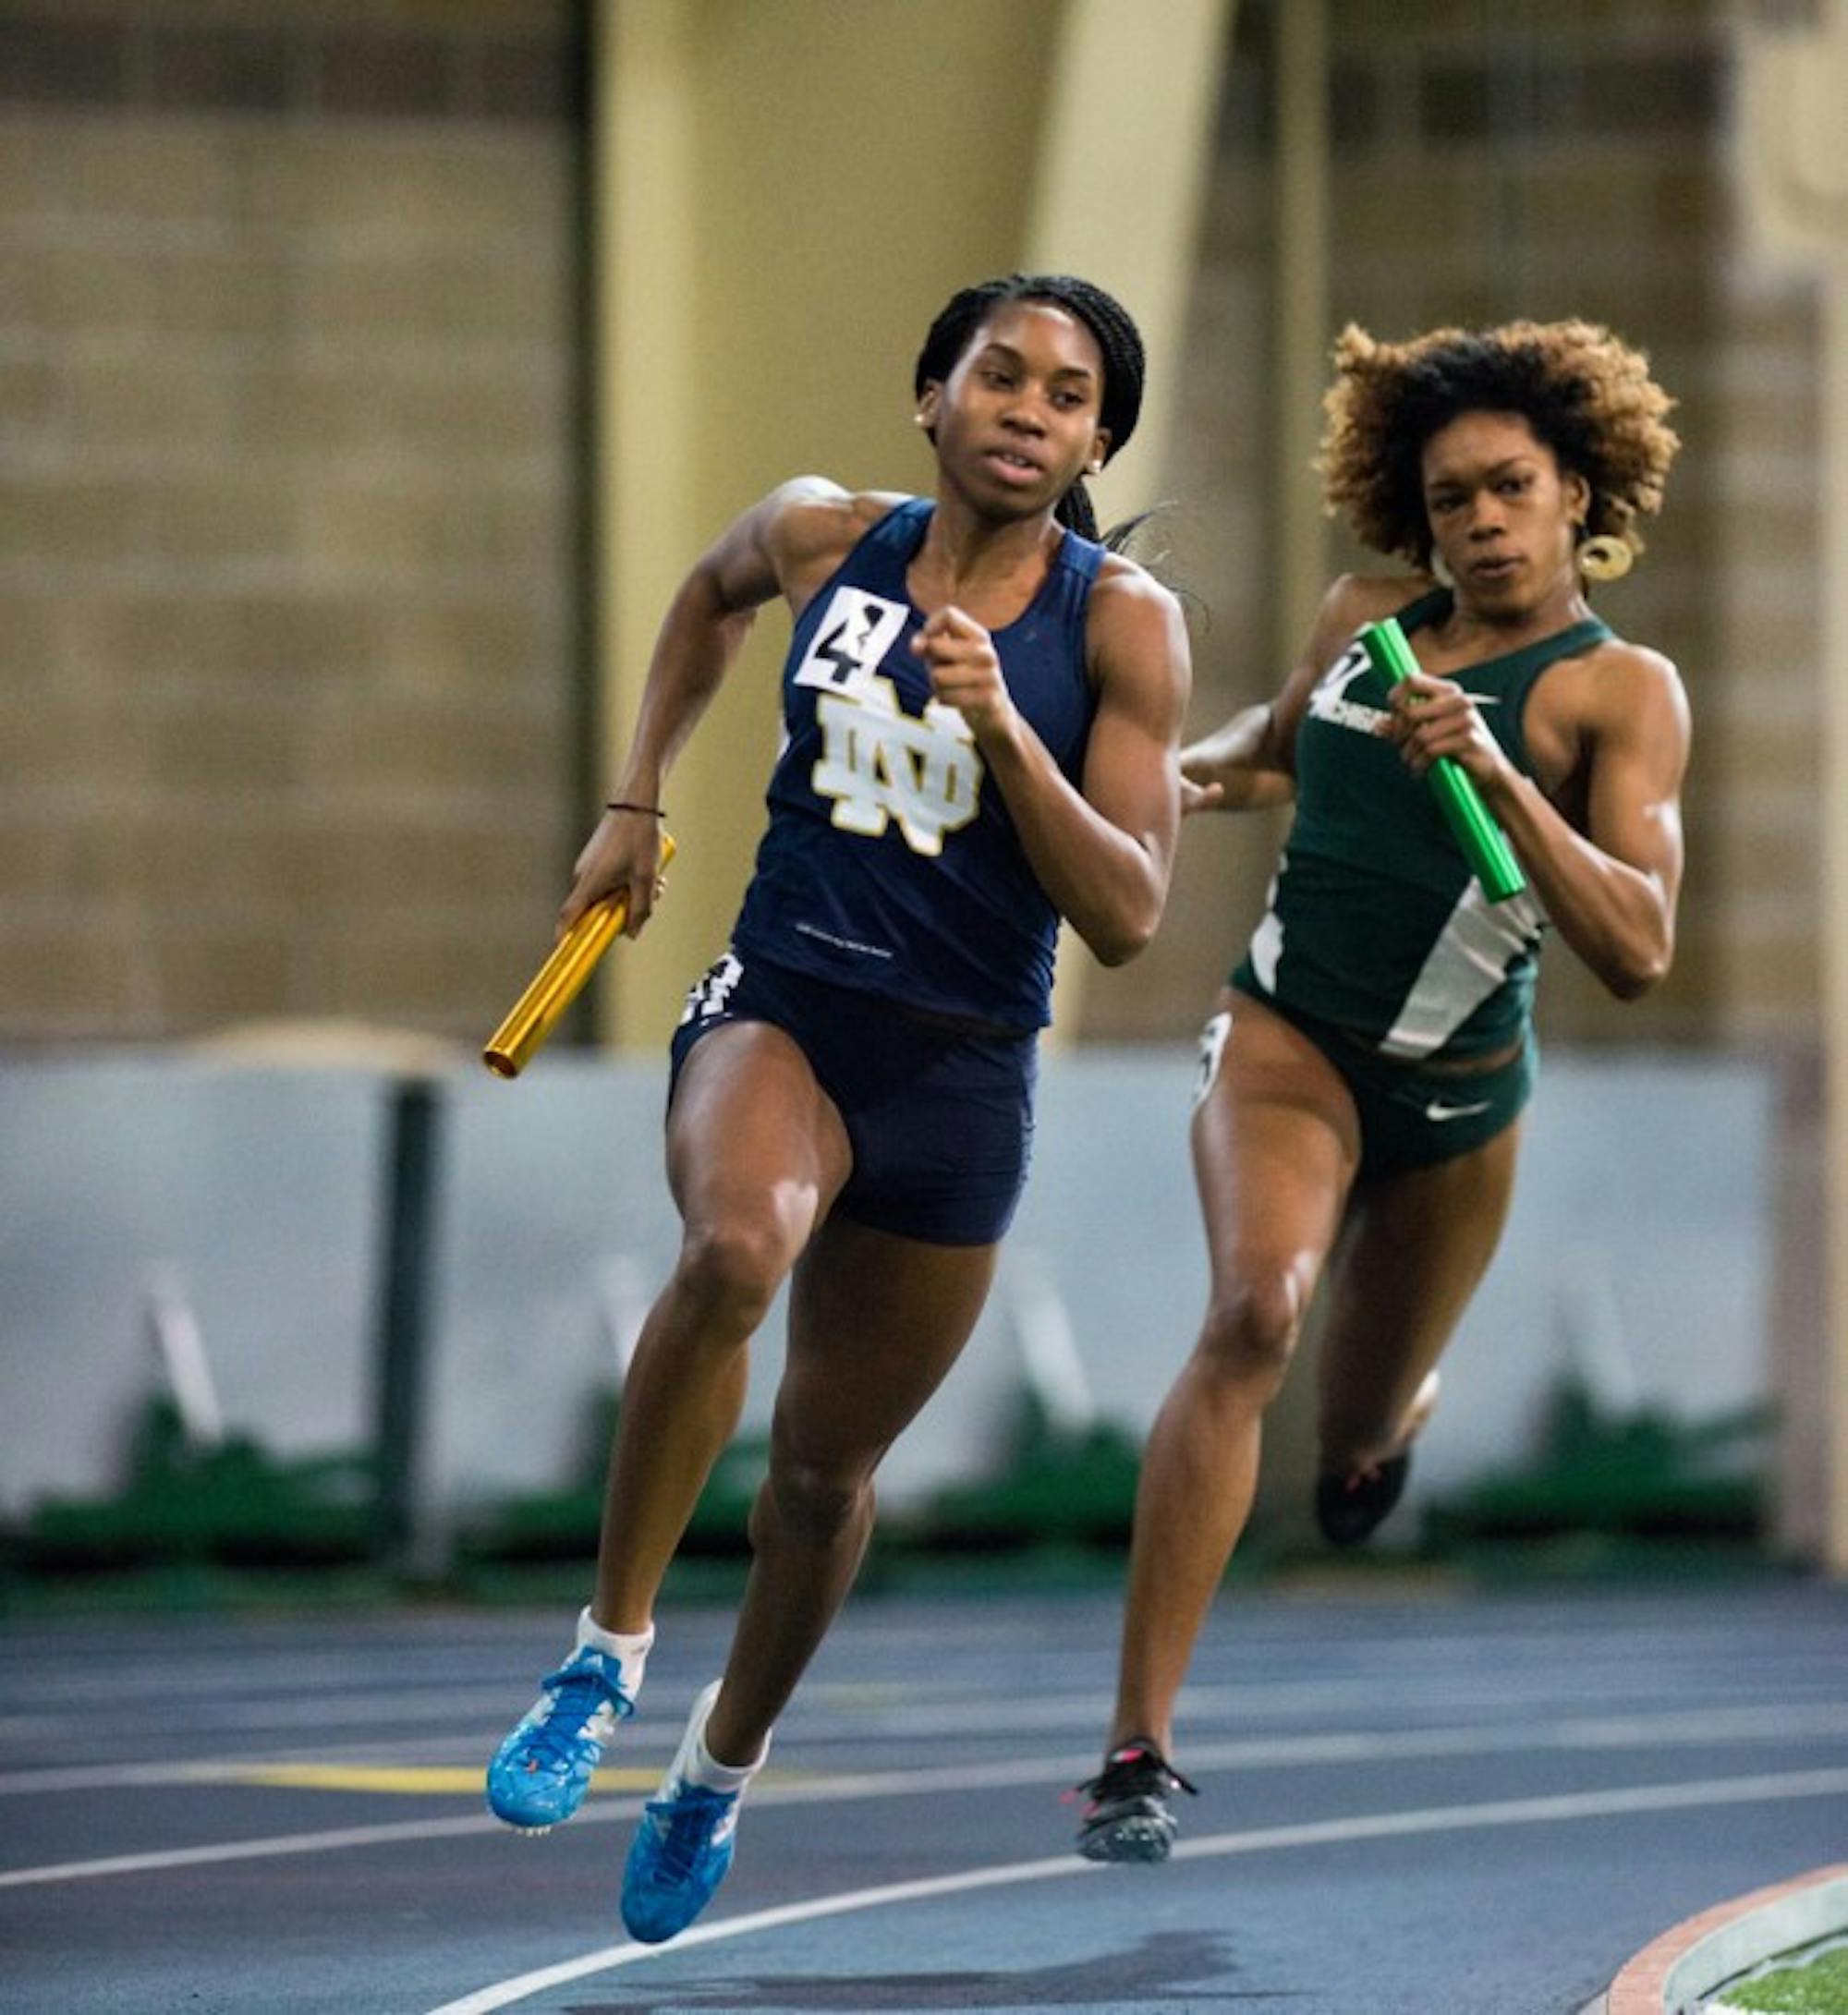 Junior sprinter Margaret Bamgbose competes in a relay during the Notre Dame Invitational at Loftus Sports Center on Jan. 24.